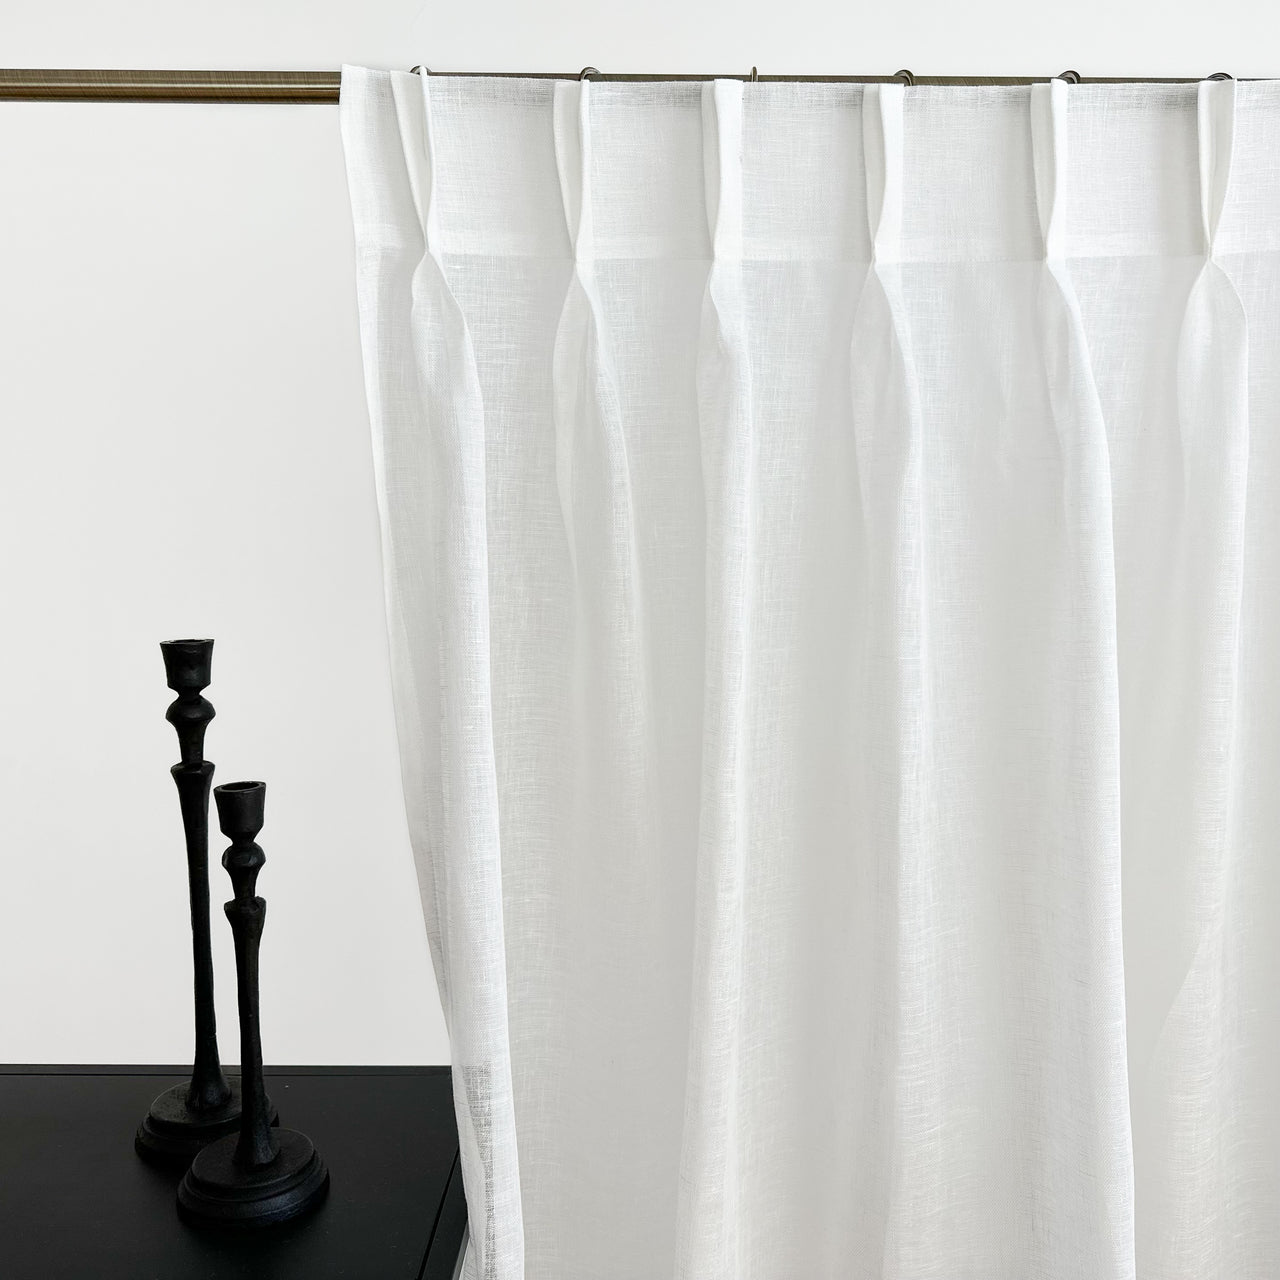 Double Pinch Pleat Sheer Curtain, Color: Off-White 